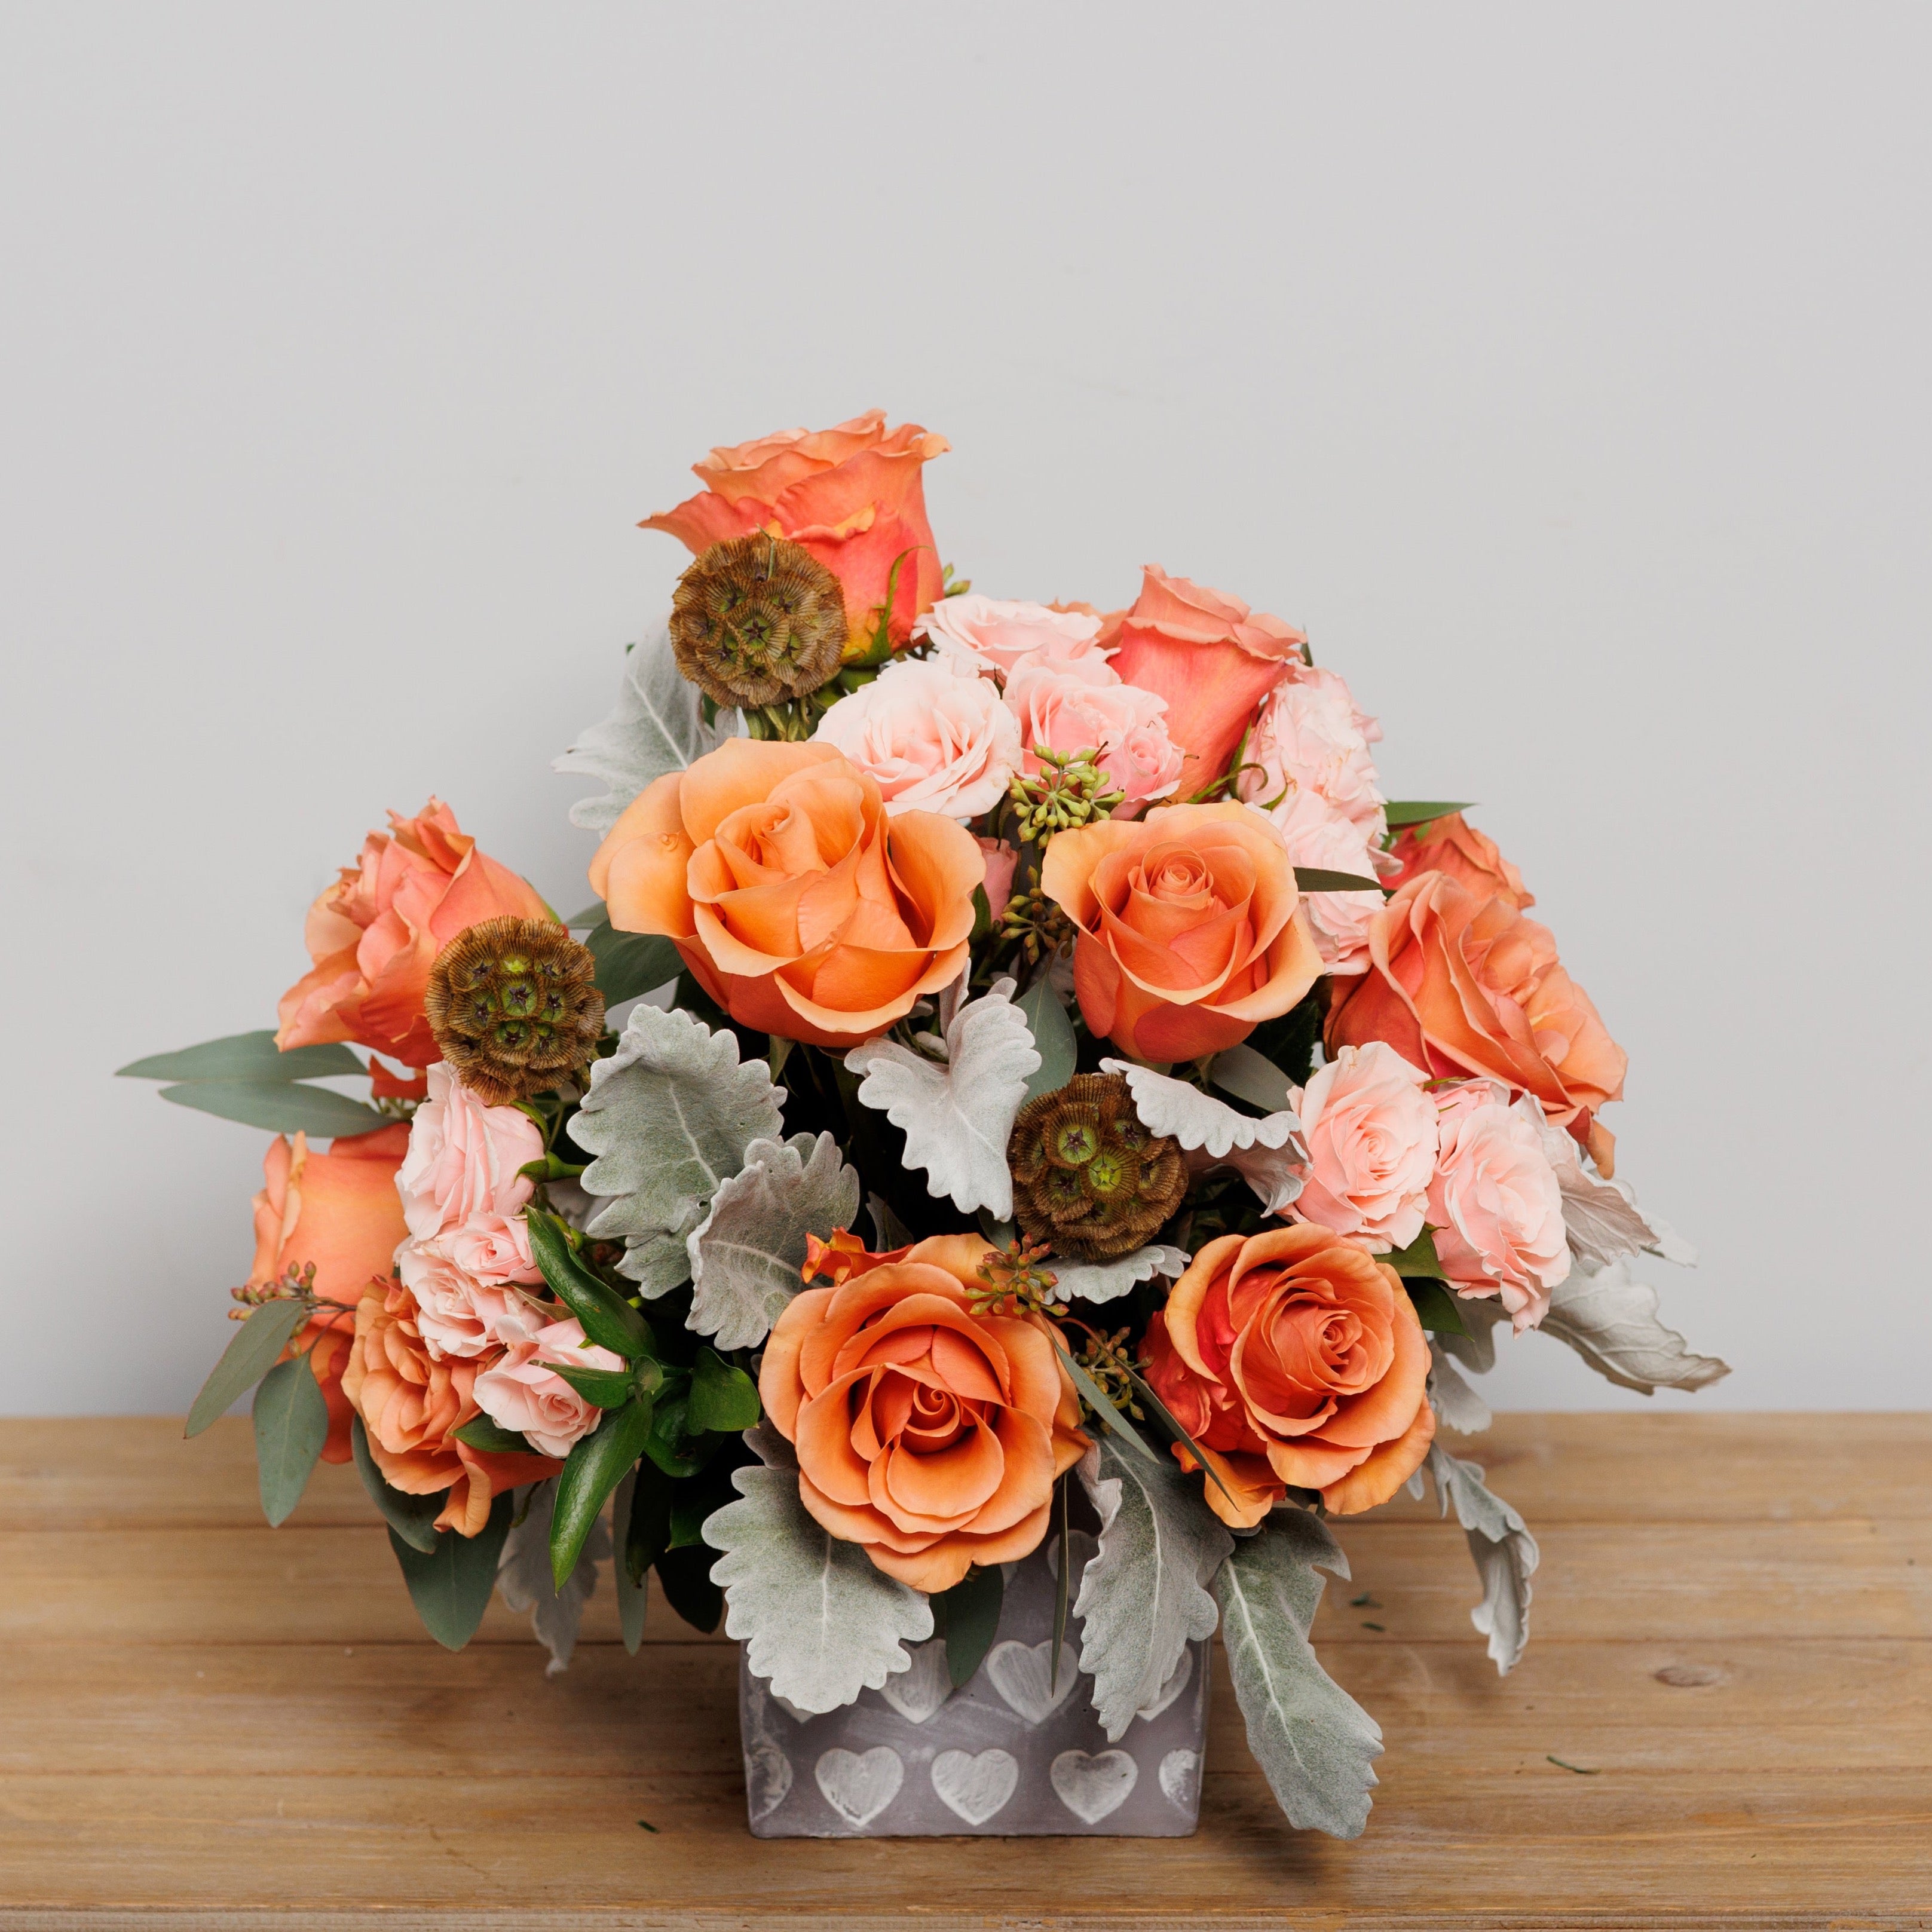 A cube arrangement with taupe and pink roses.